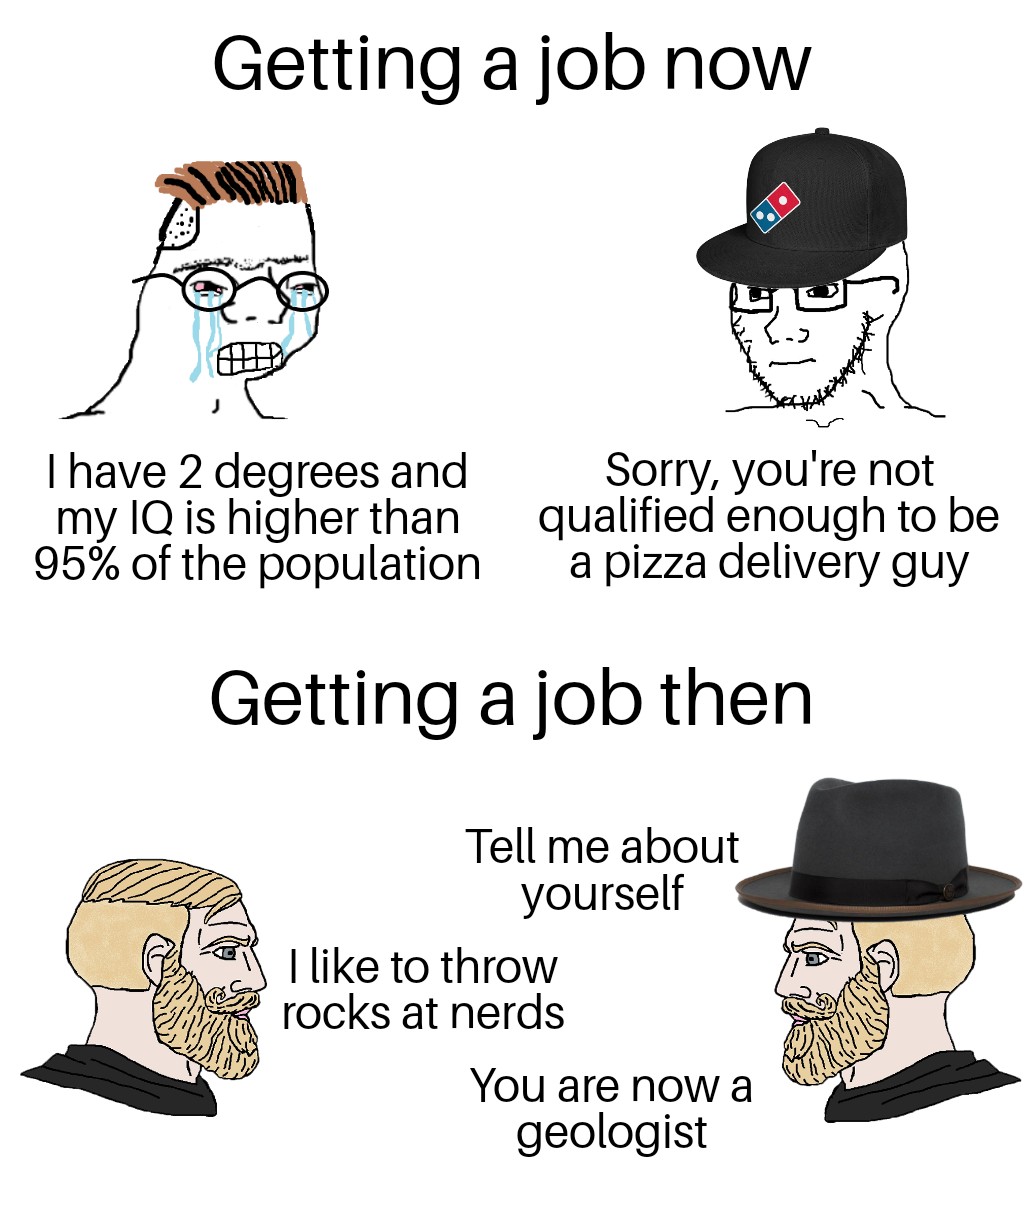 dank memes - getting a job now vs then meme - Getting a job now I have 2 degrees and my Iq is higher than 95% of the population Sorry, you're not qualified enough to be a pizza delivery guy Getting a job then Tell me about yourself I to throw rocks at ner